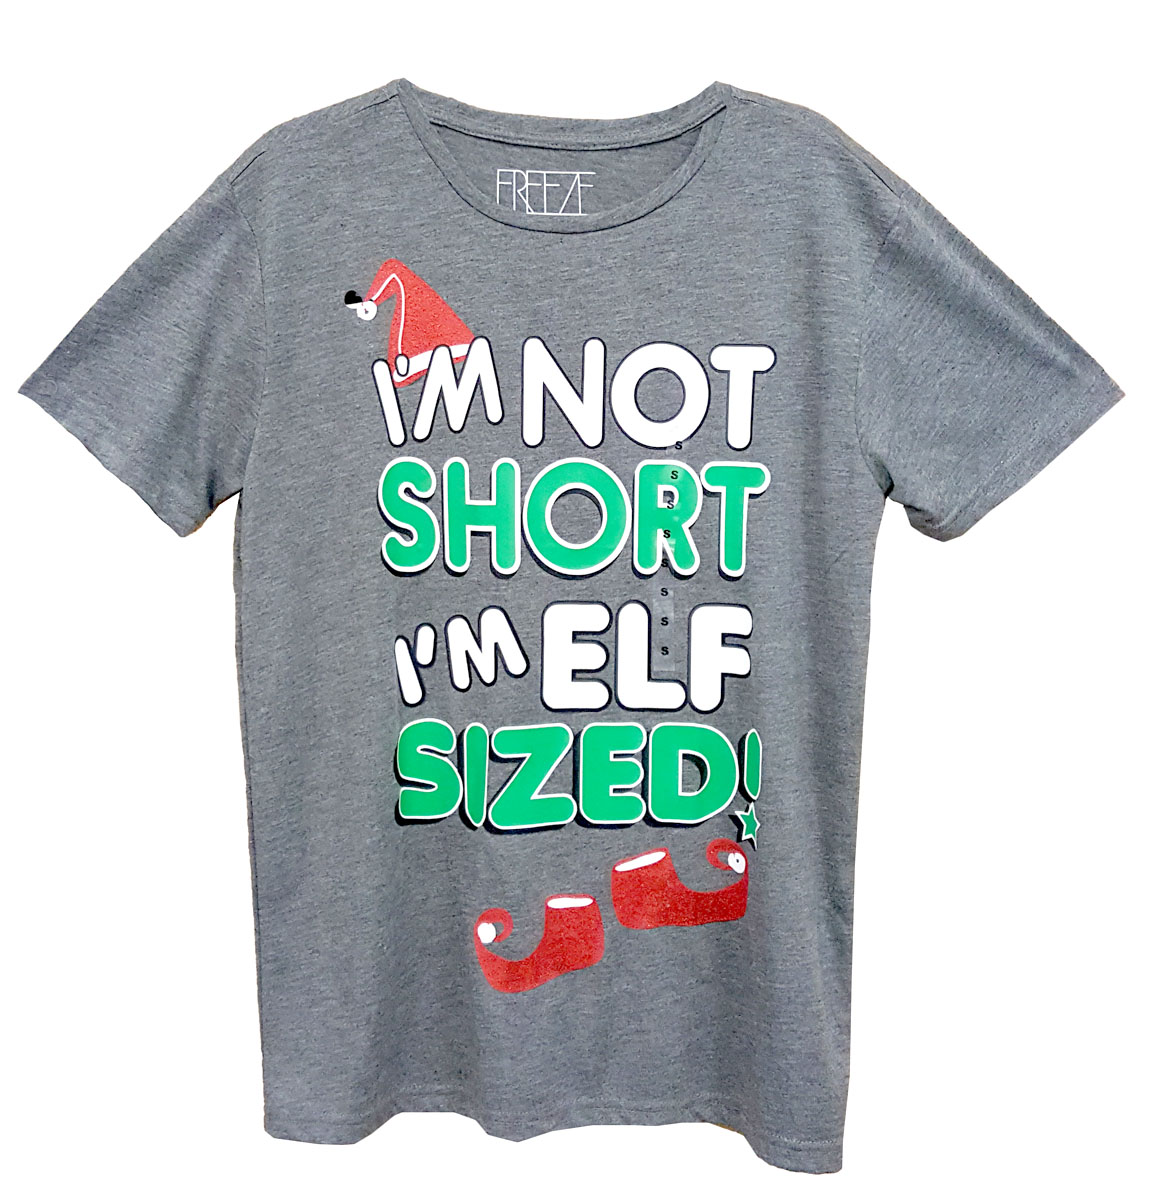 JUNIOR I AM NOT SHORT I'M ELF SIZED GRAPHIC TSHIRT Mens and Boys Tee Shirt - Grey - Small Size